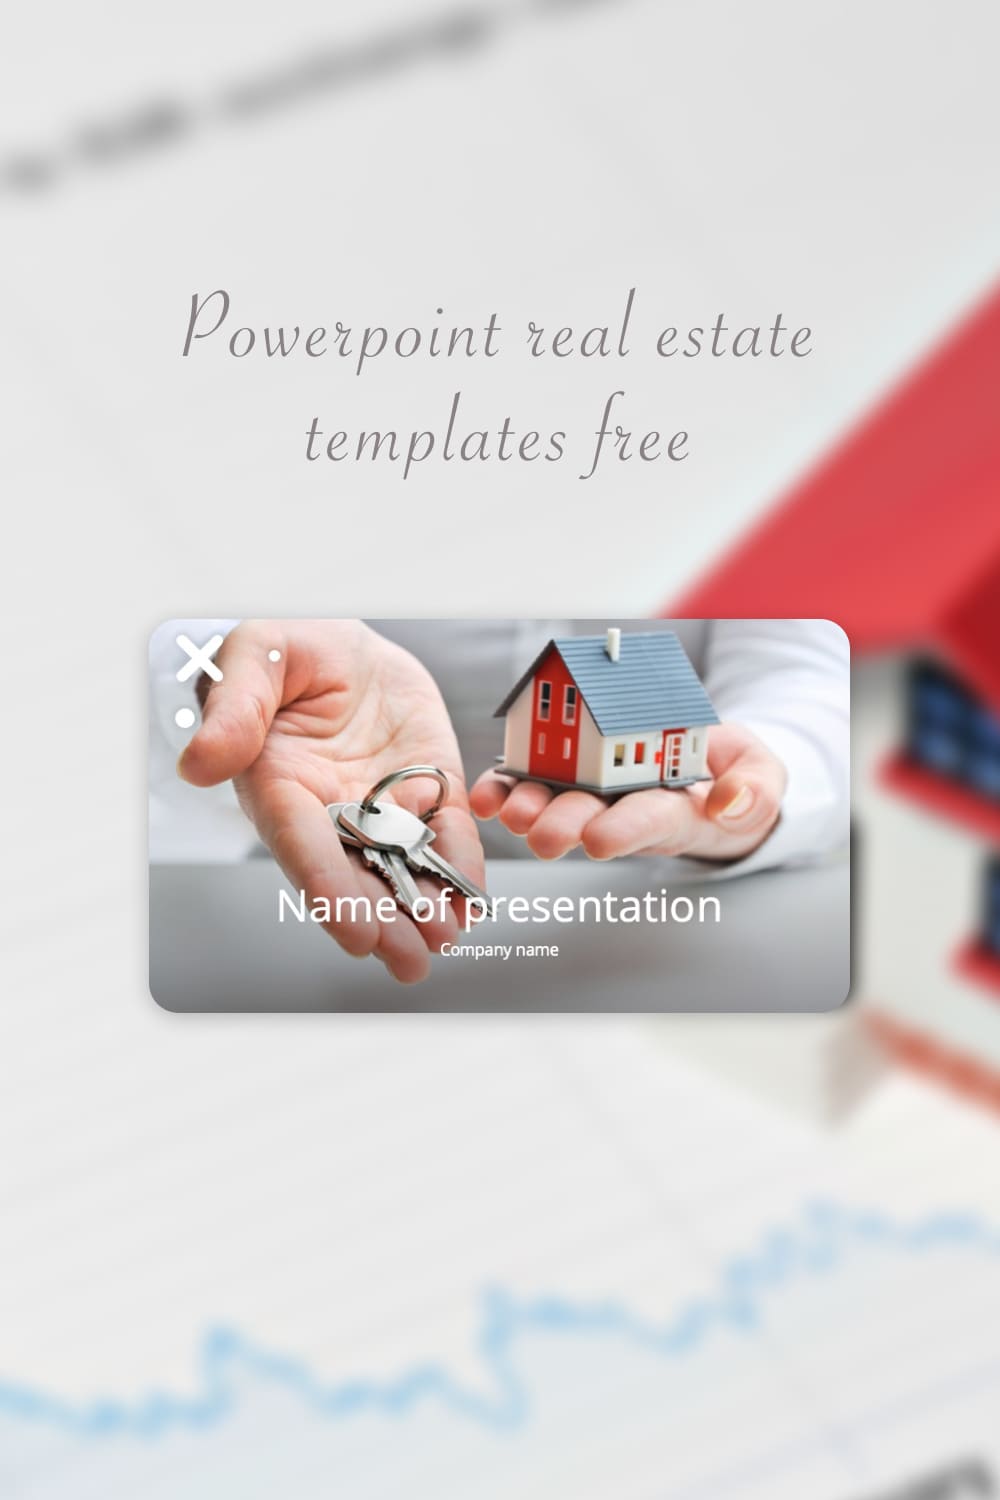 Pinterest Powerpoint Real Estate Templates Free.